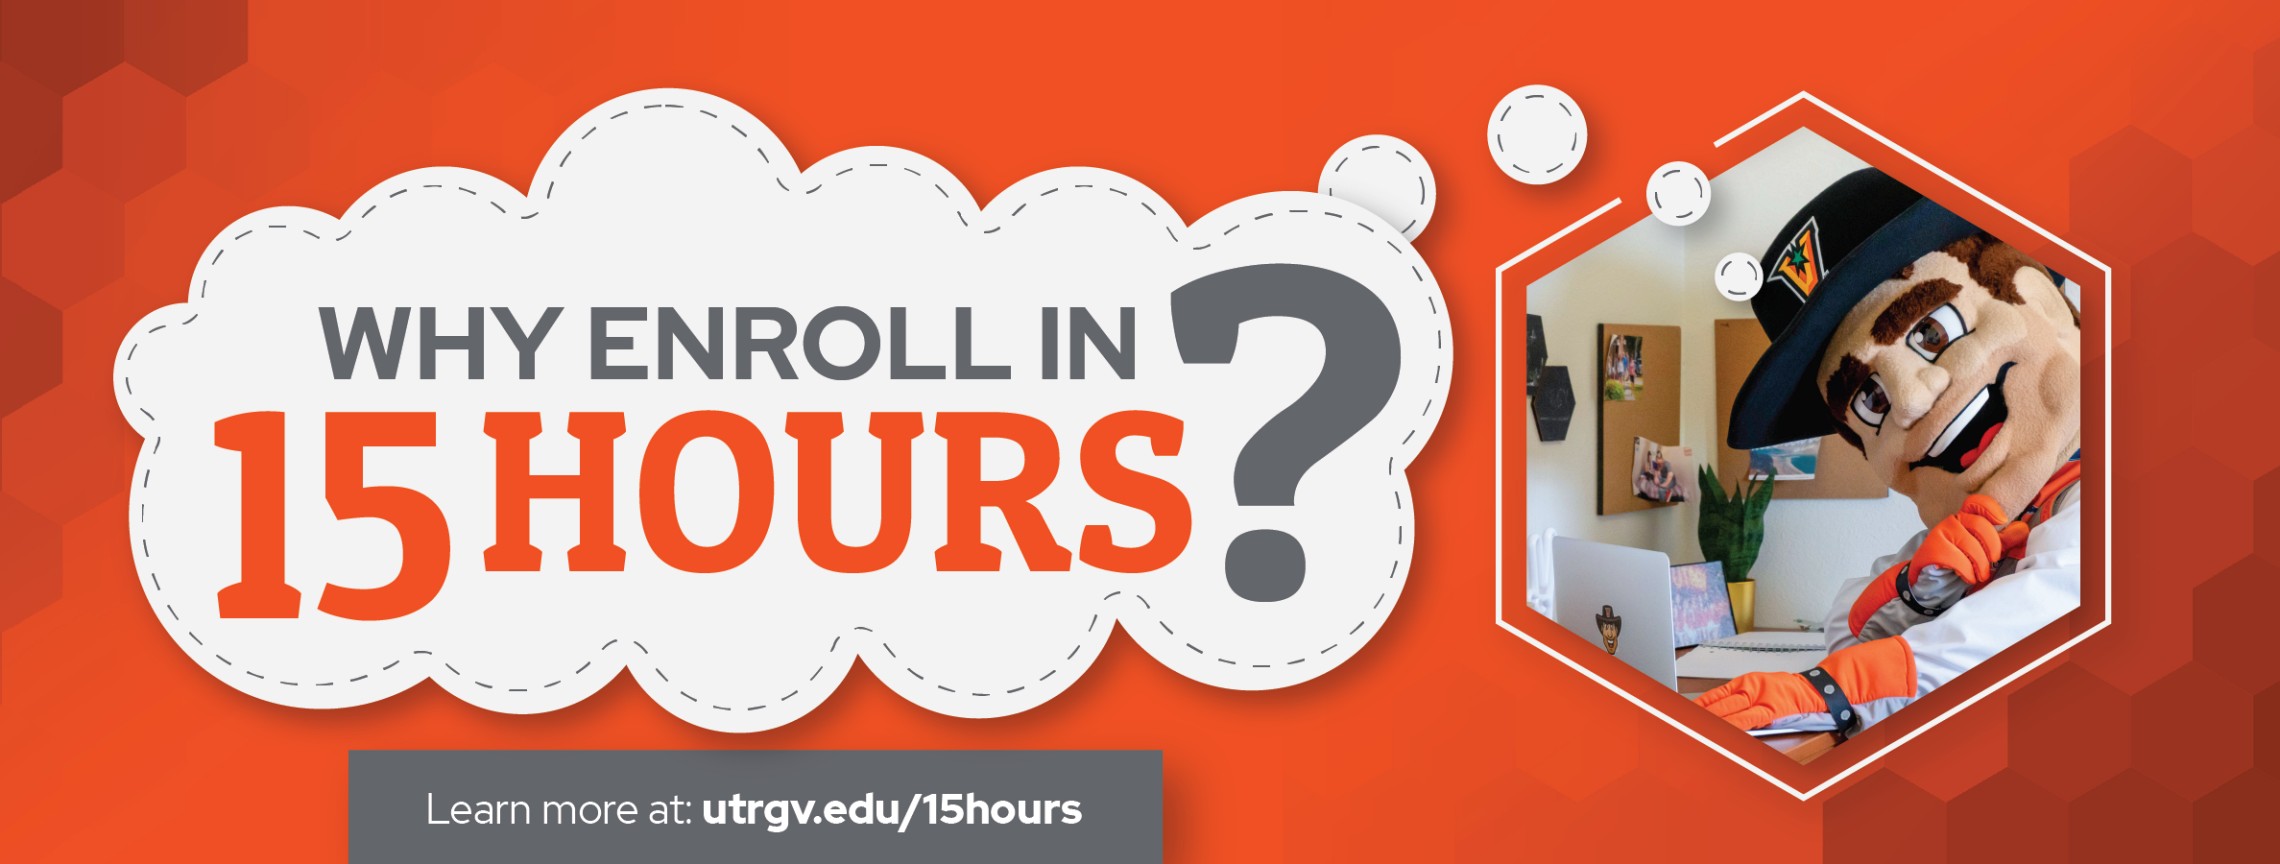 Why Enroll in 15 Hours? Learn more at: utrgv.edu/15hours